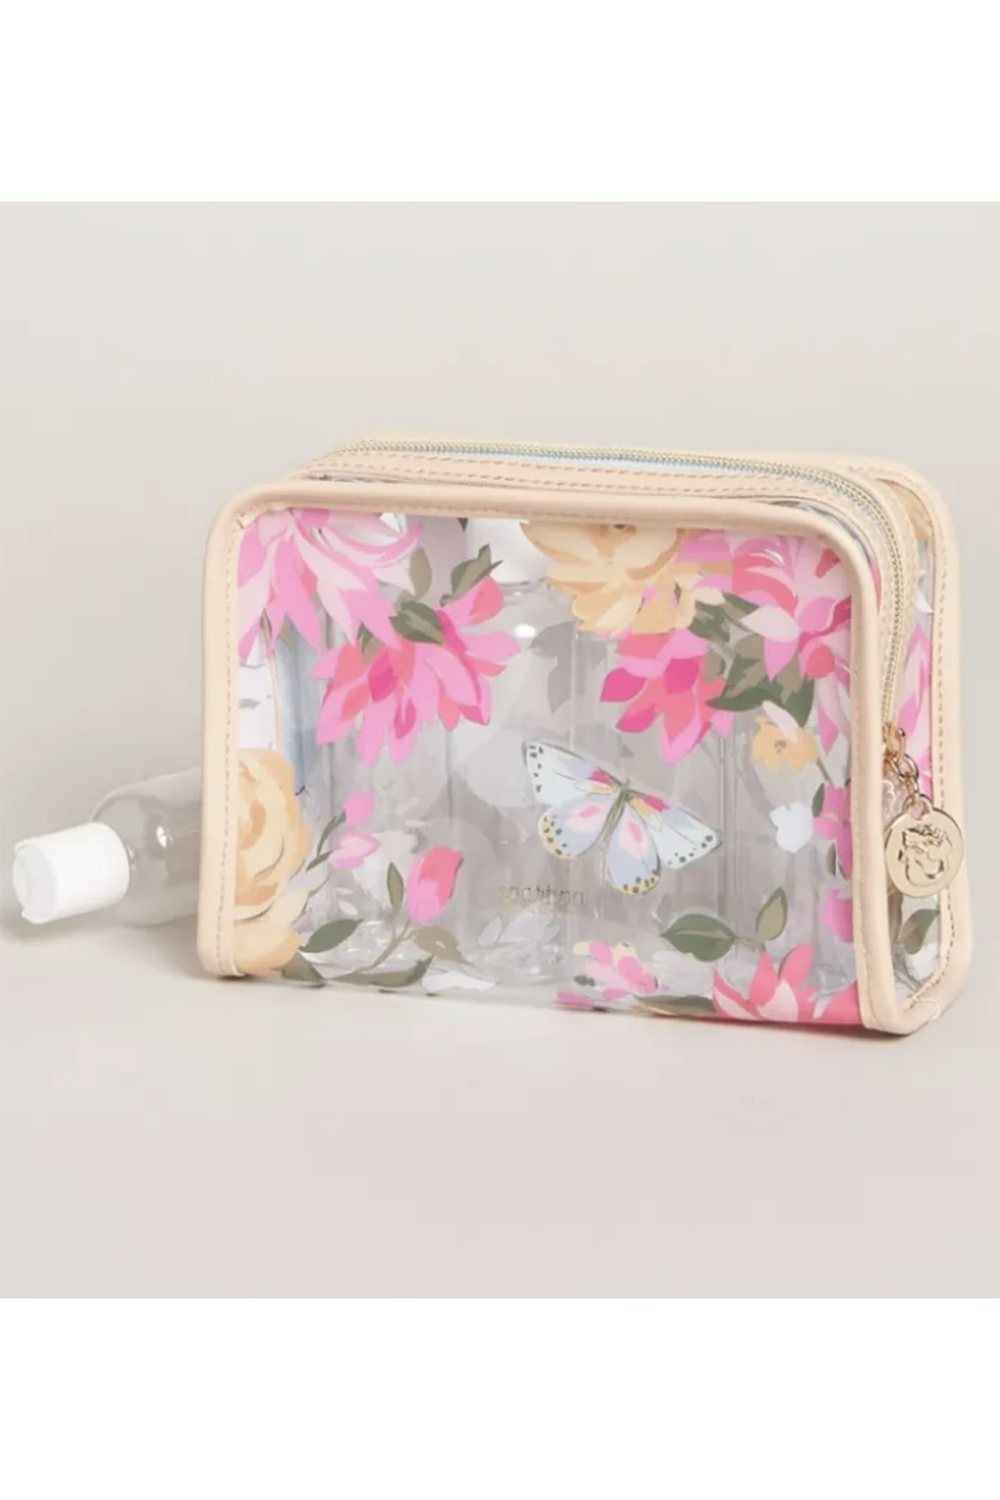 Spartina Clear Travel Case - Babbie's Store